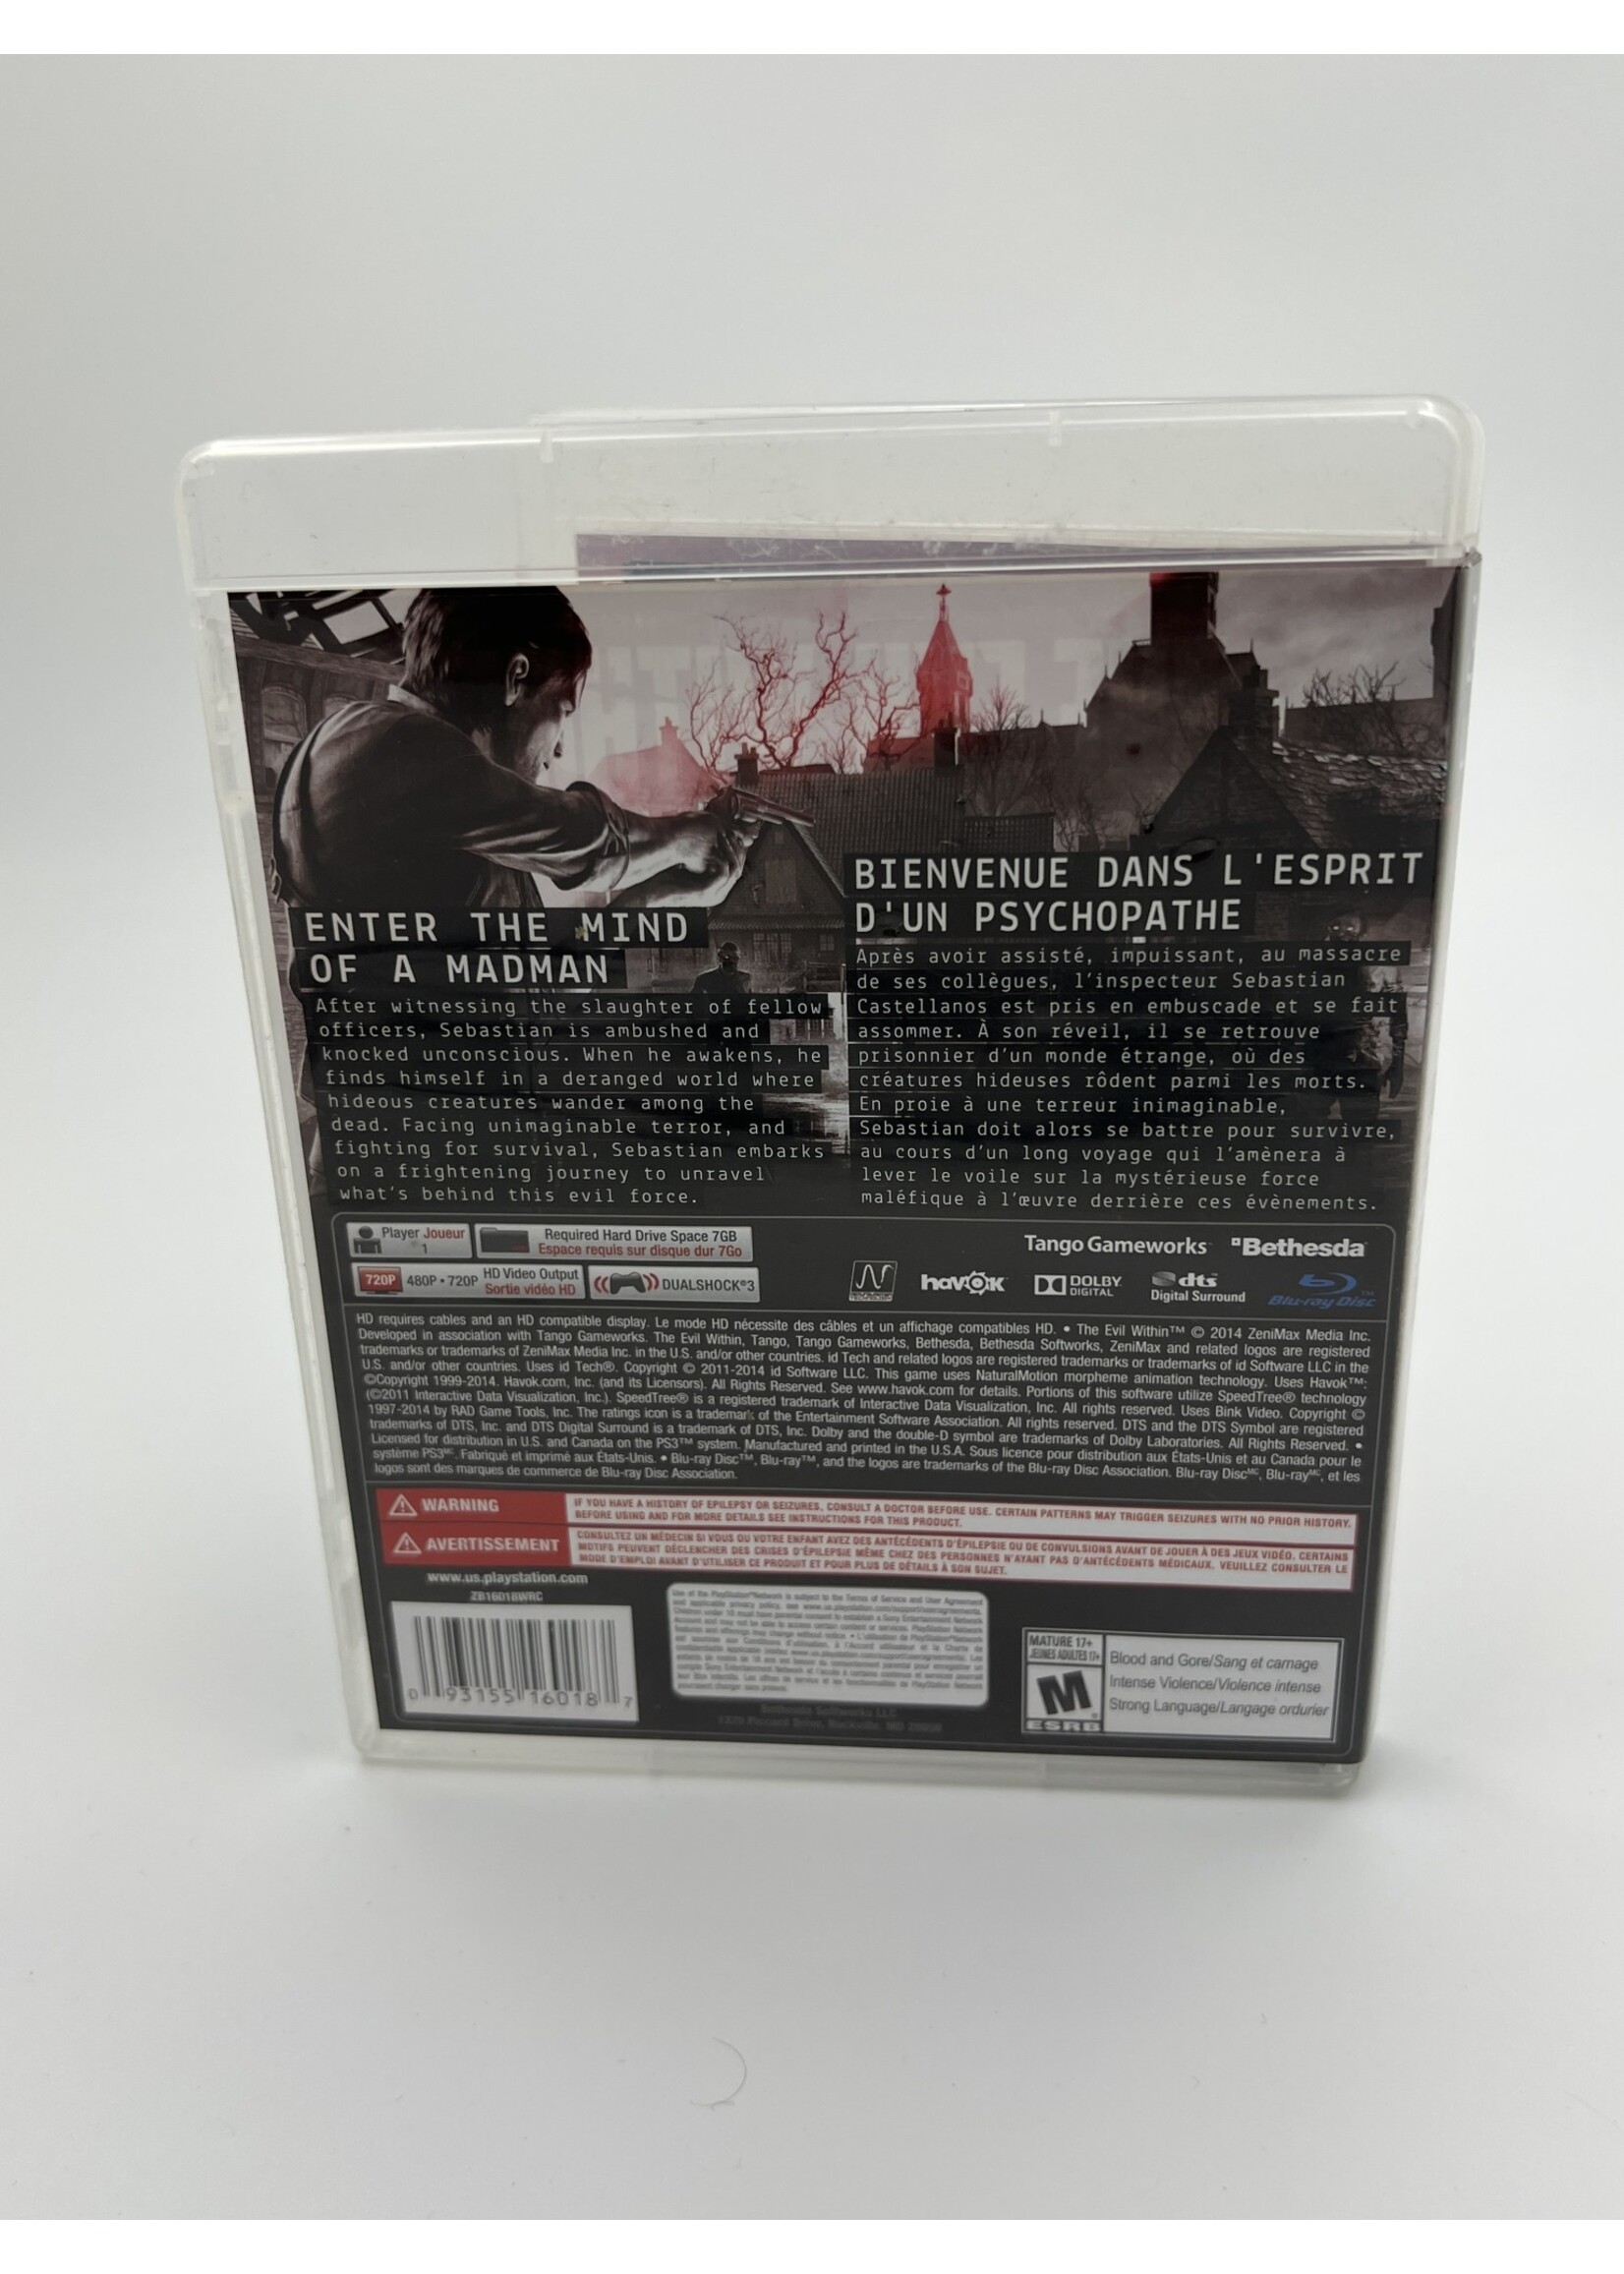 Sony The Evil Within PS3